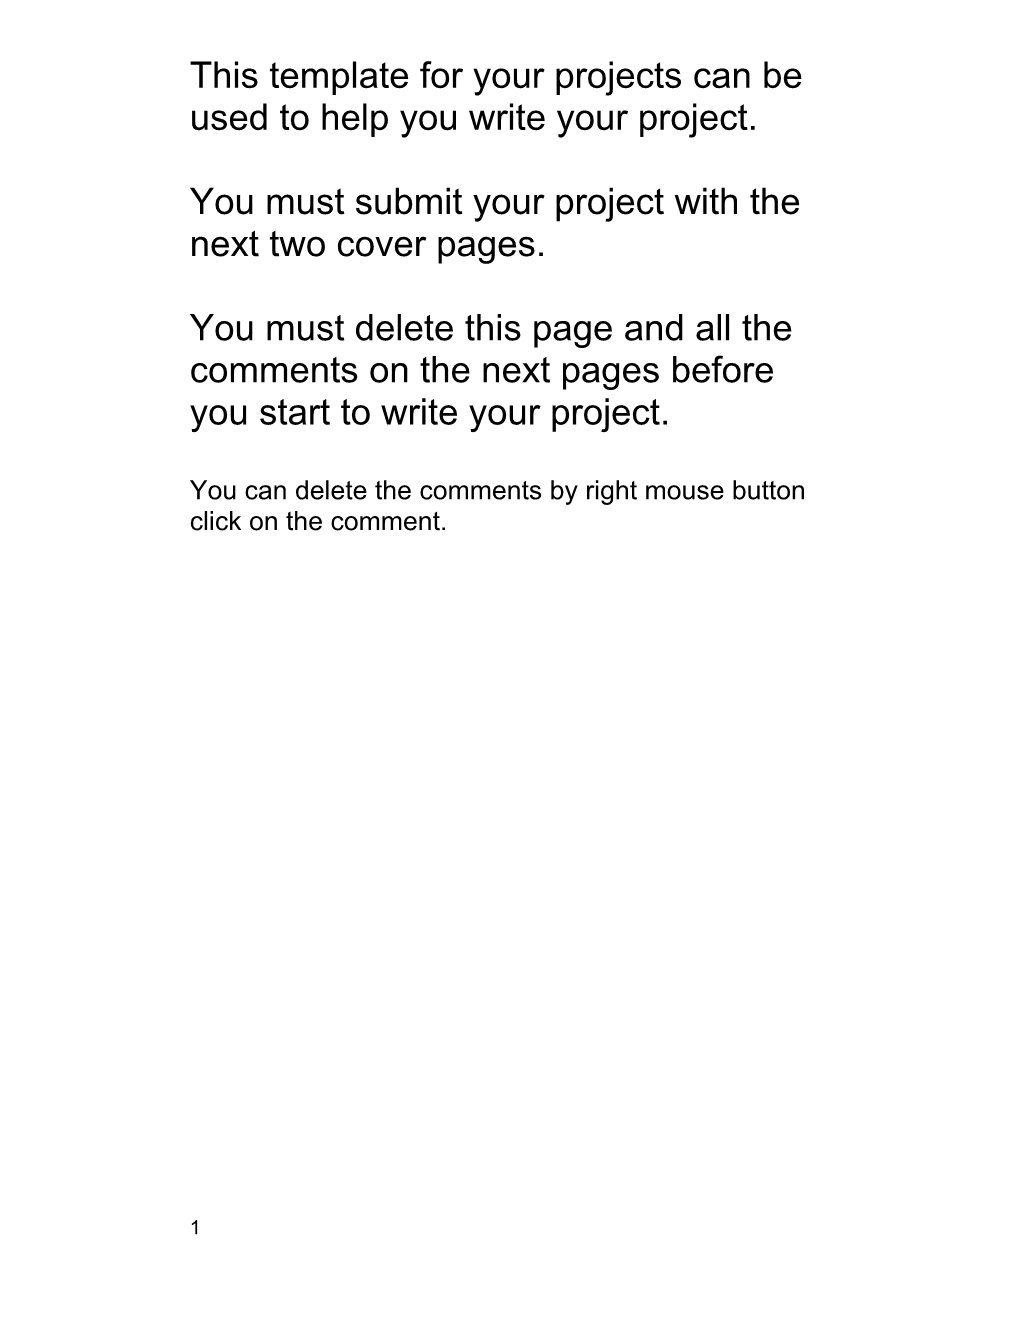 You Must Submit Your Project with the Next Two Cover Pages